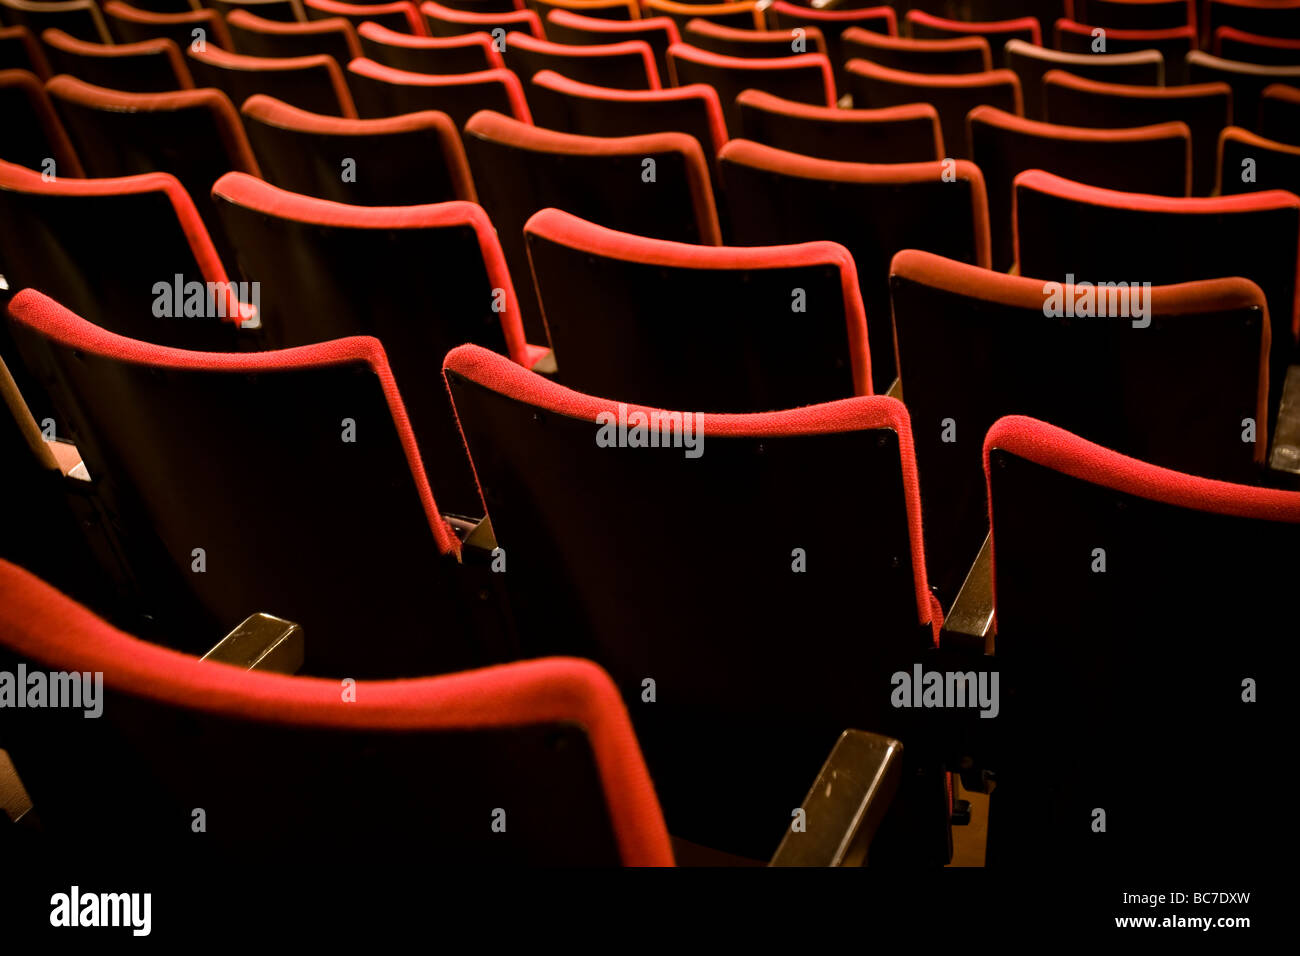 Array of red velour seats in an old theatre. Stock Photo